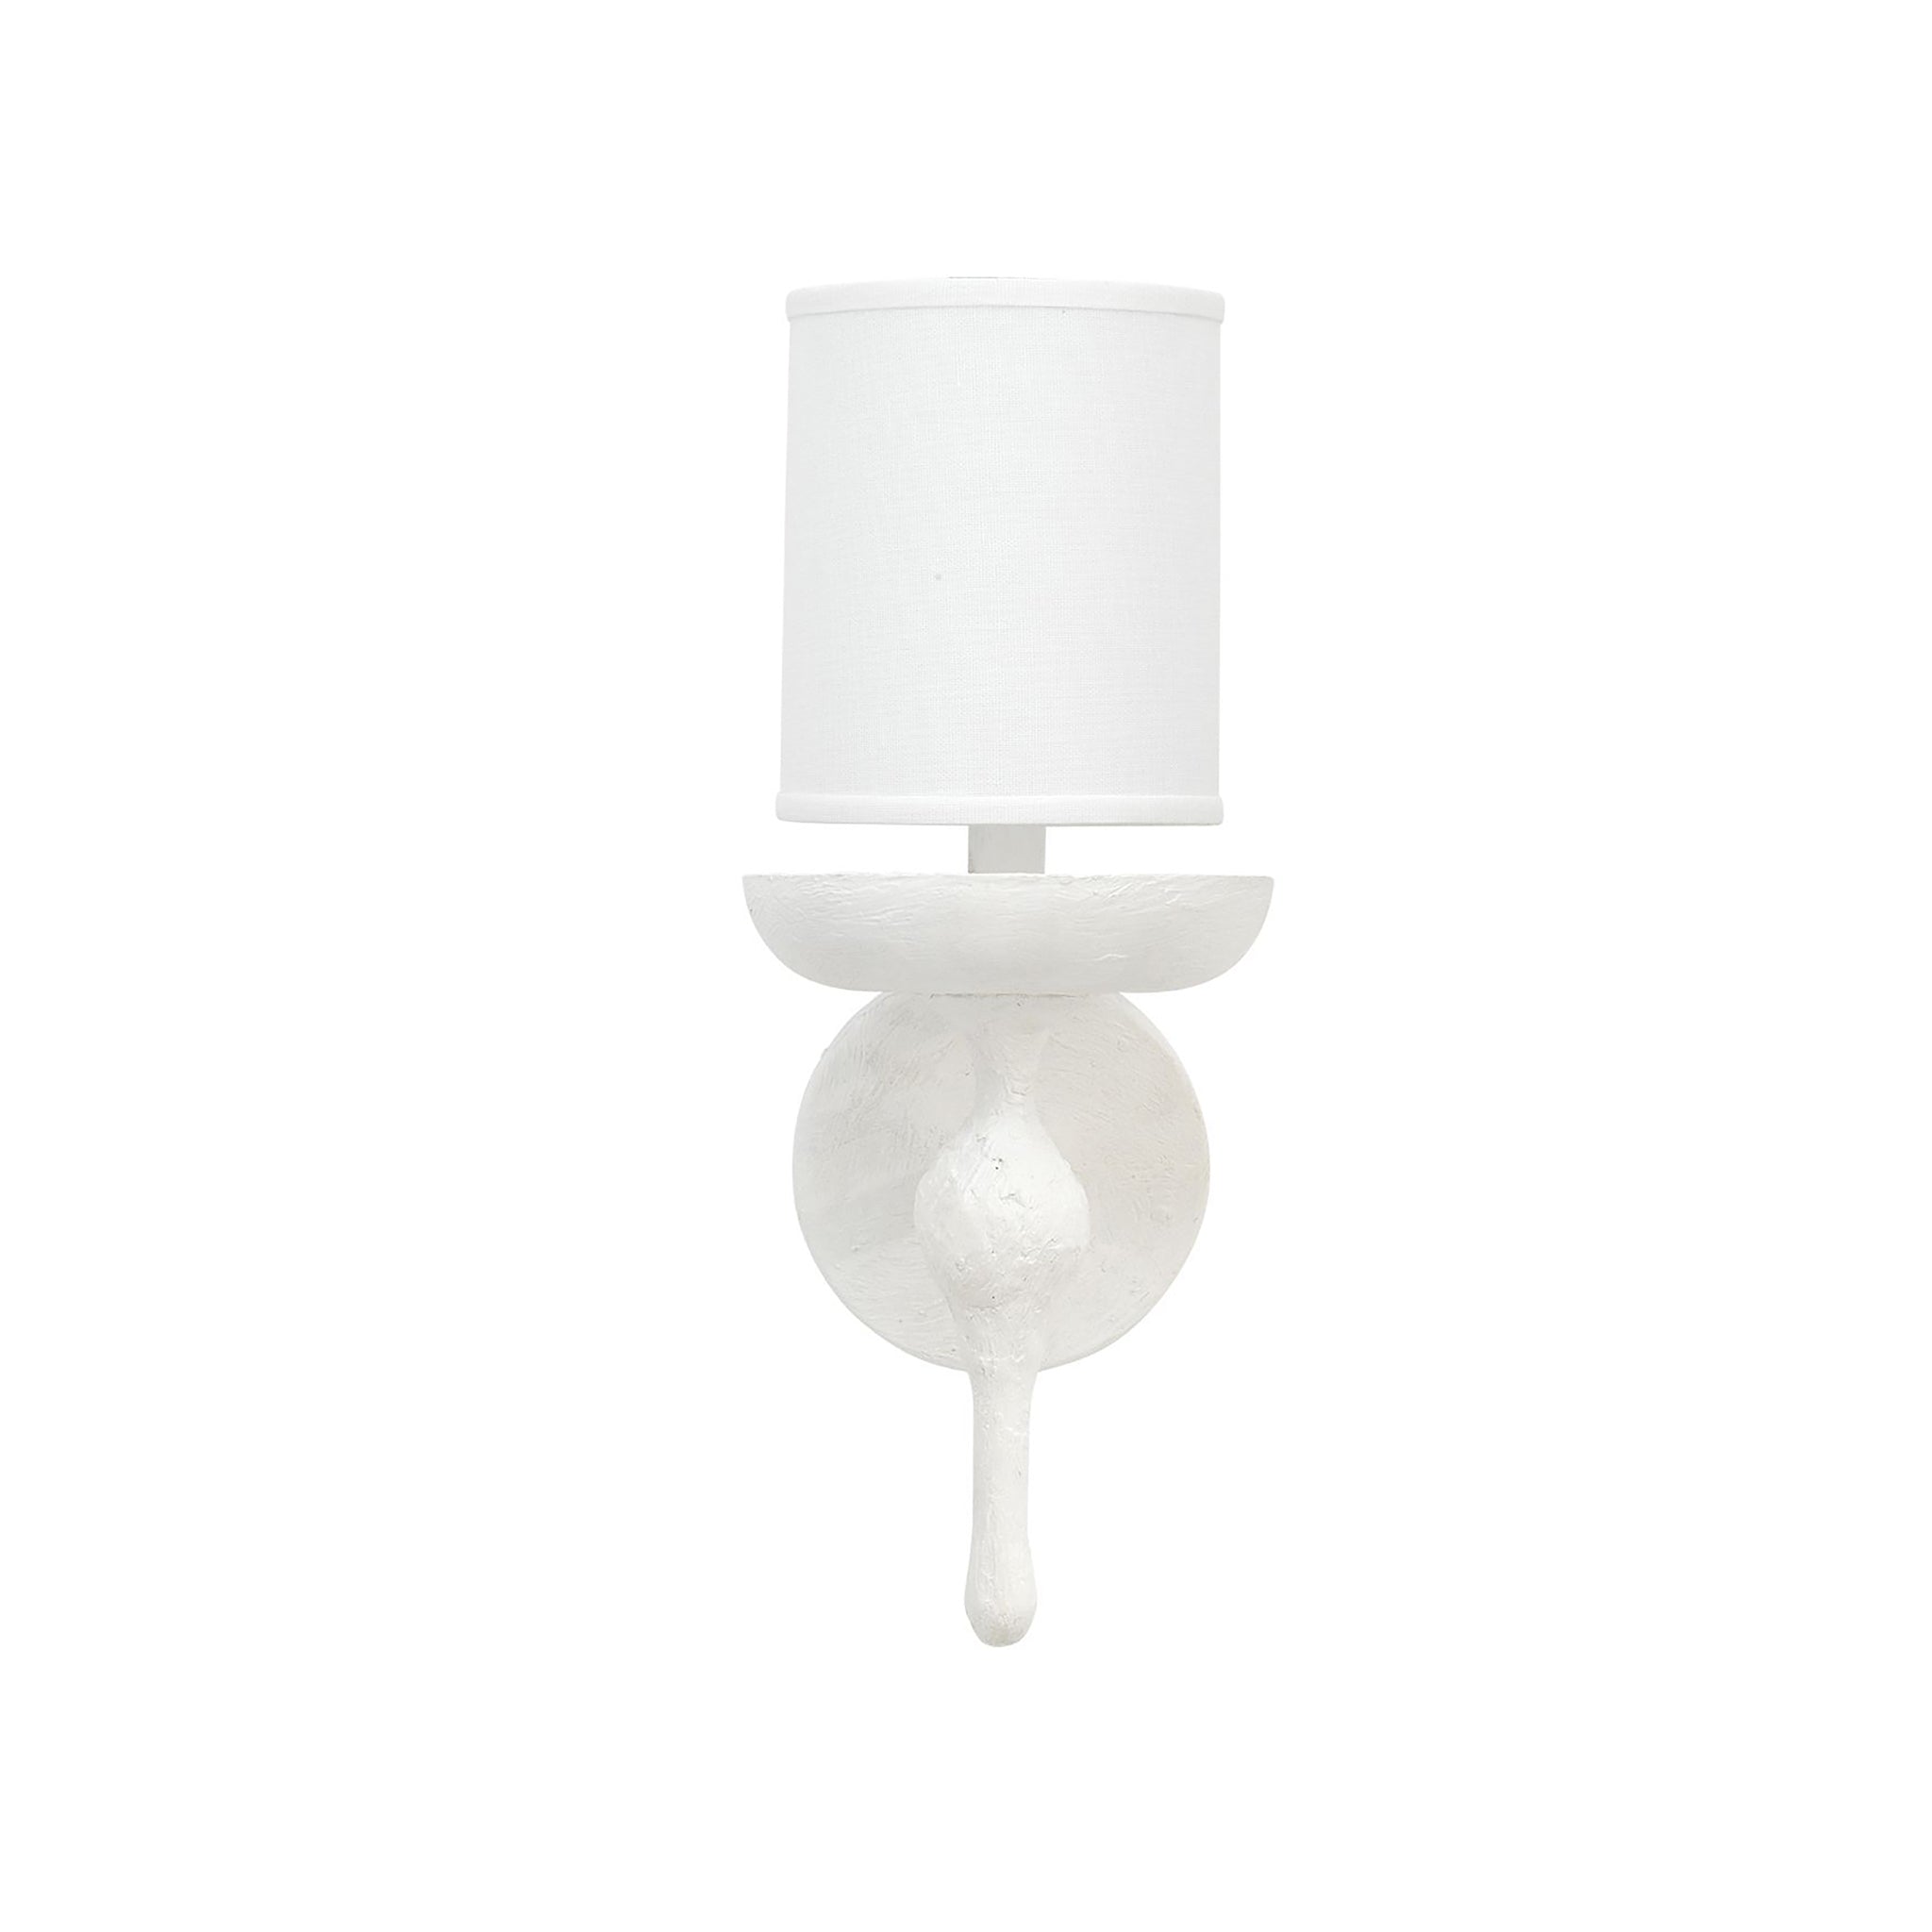 Stockholm Wall Sconce in White Plaster